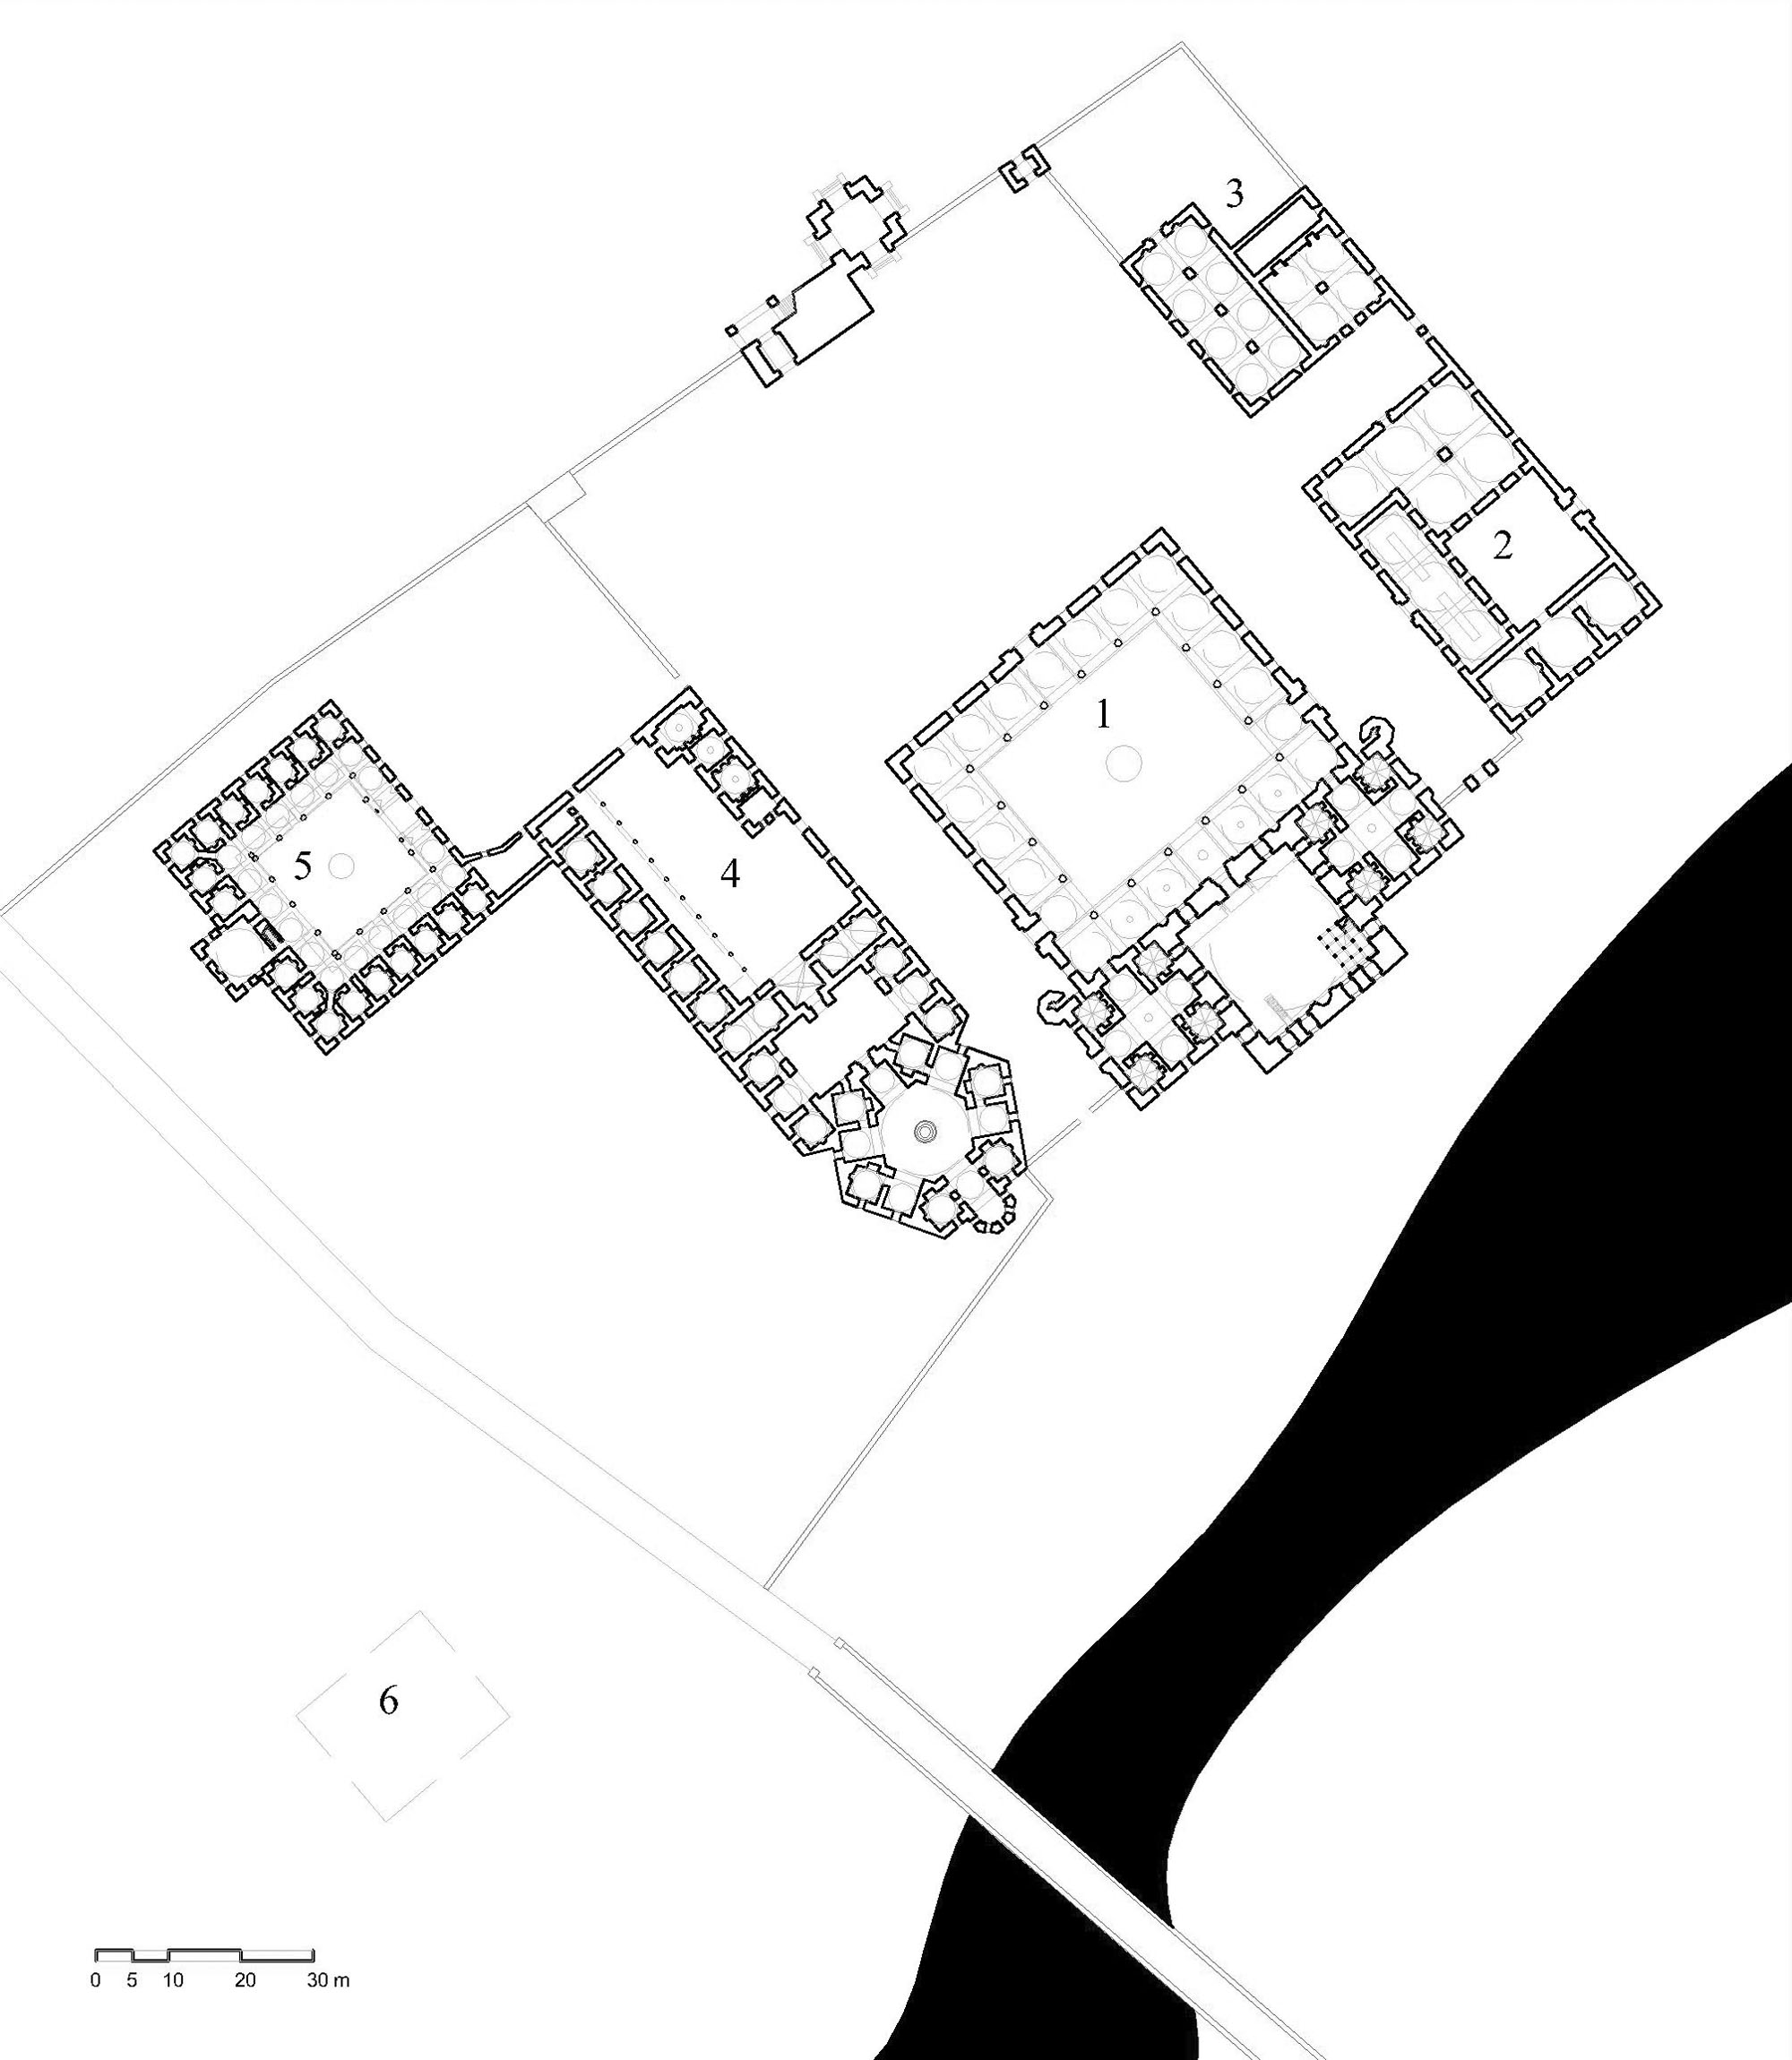 II Bayezid Külliyesi (Edirne) - Floor plan of complex along the Tunca river, showing (1) mosque, (2) hospice, (3) caravanserai, (4) hospital, (5) madrasa, (6) site of bathhouse. DWG file in AutoCAD 2000 format. Click the download button to download a zipped file containing the .dwg file.